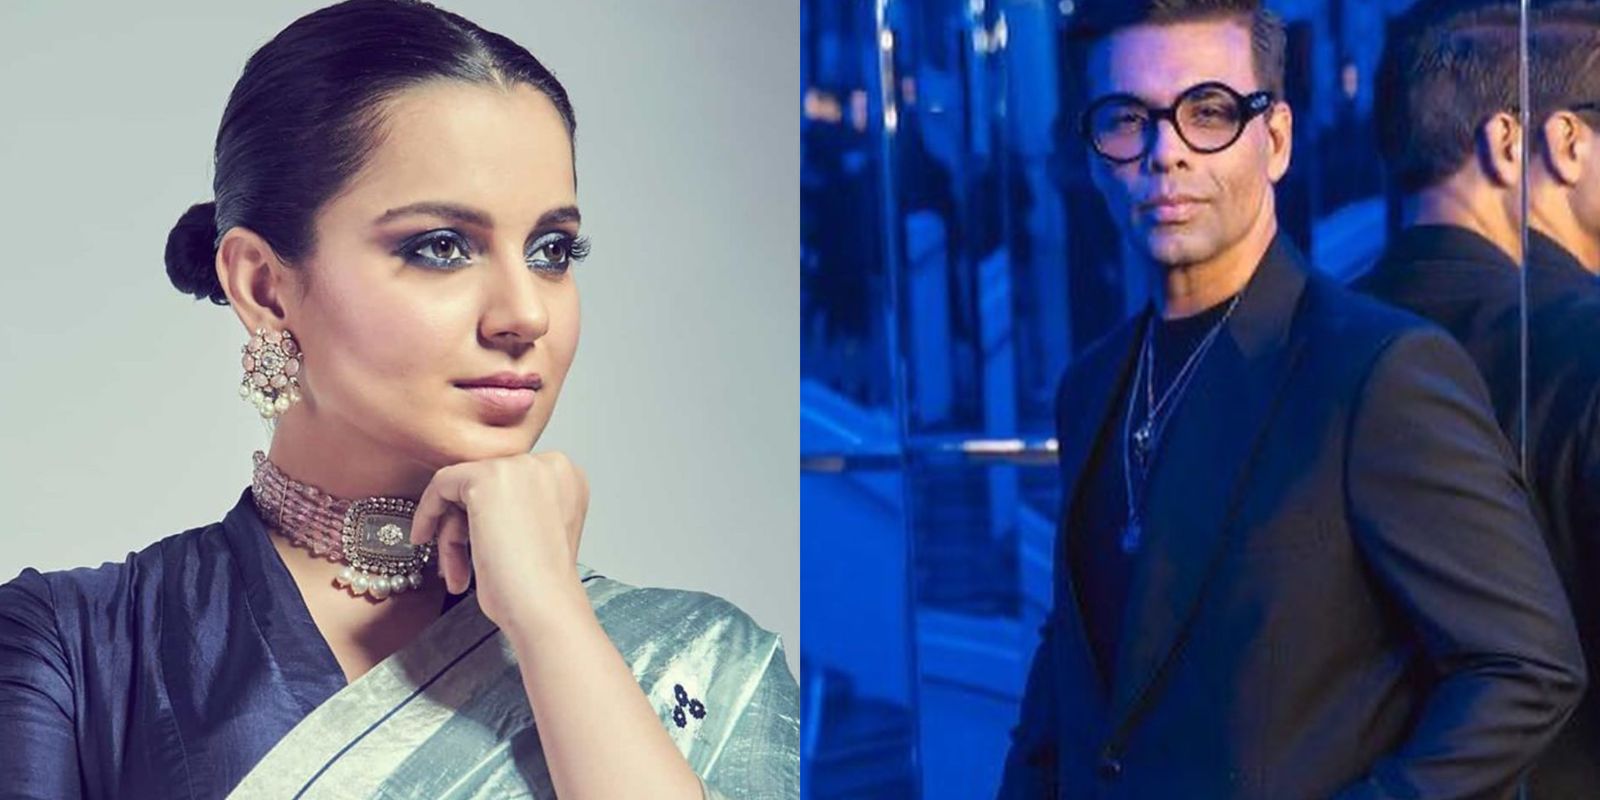 Karan Johar's Old Interview Goes Viral, Said 'Done With Kangana Playing The Victim Card, Leave The Industry'